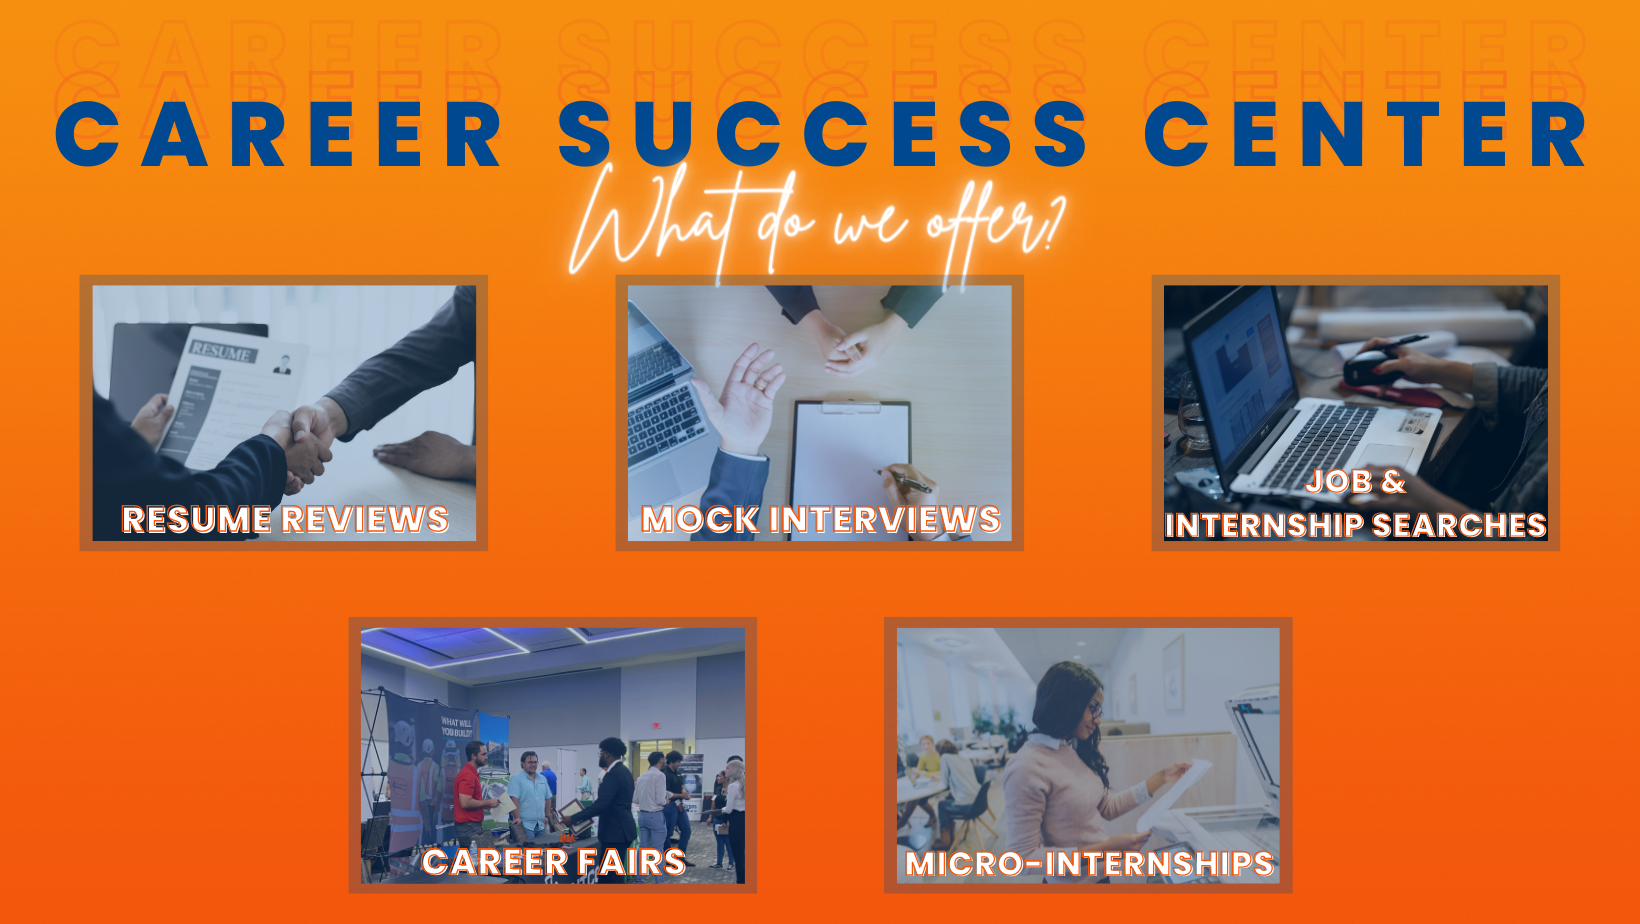 About Career Services